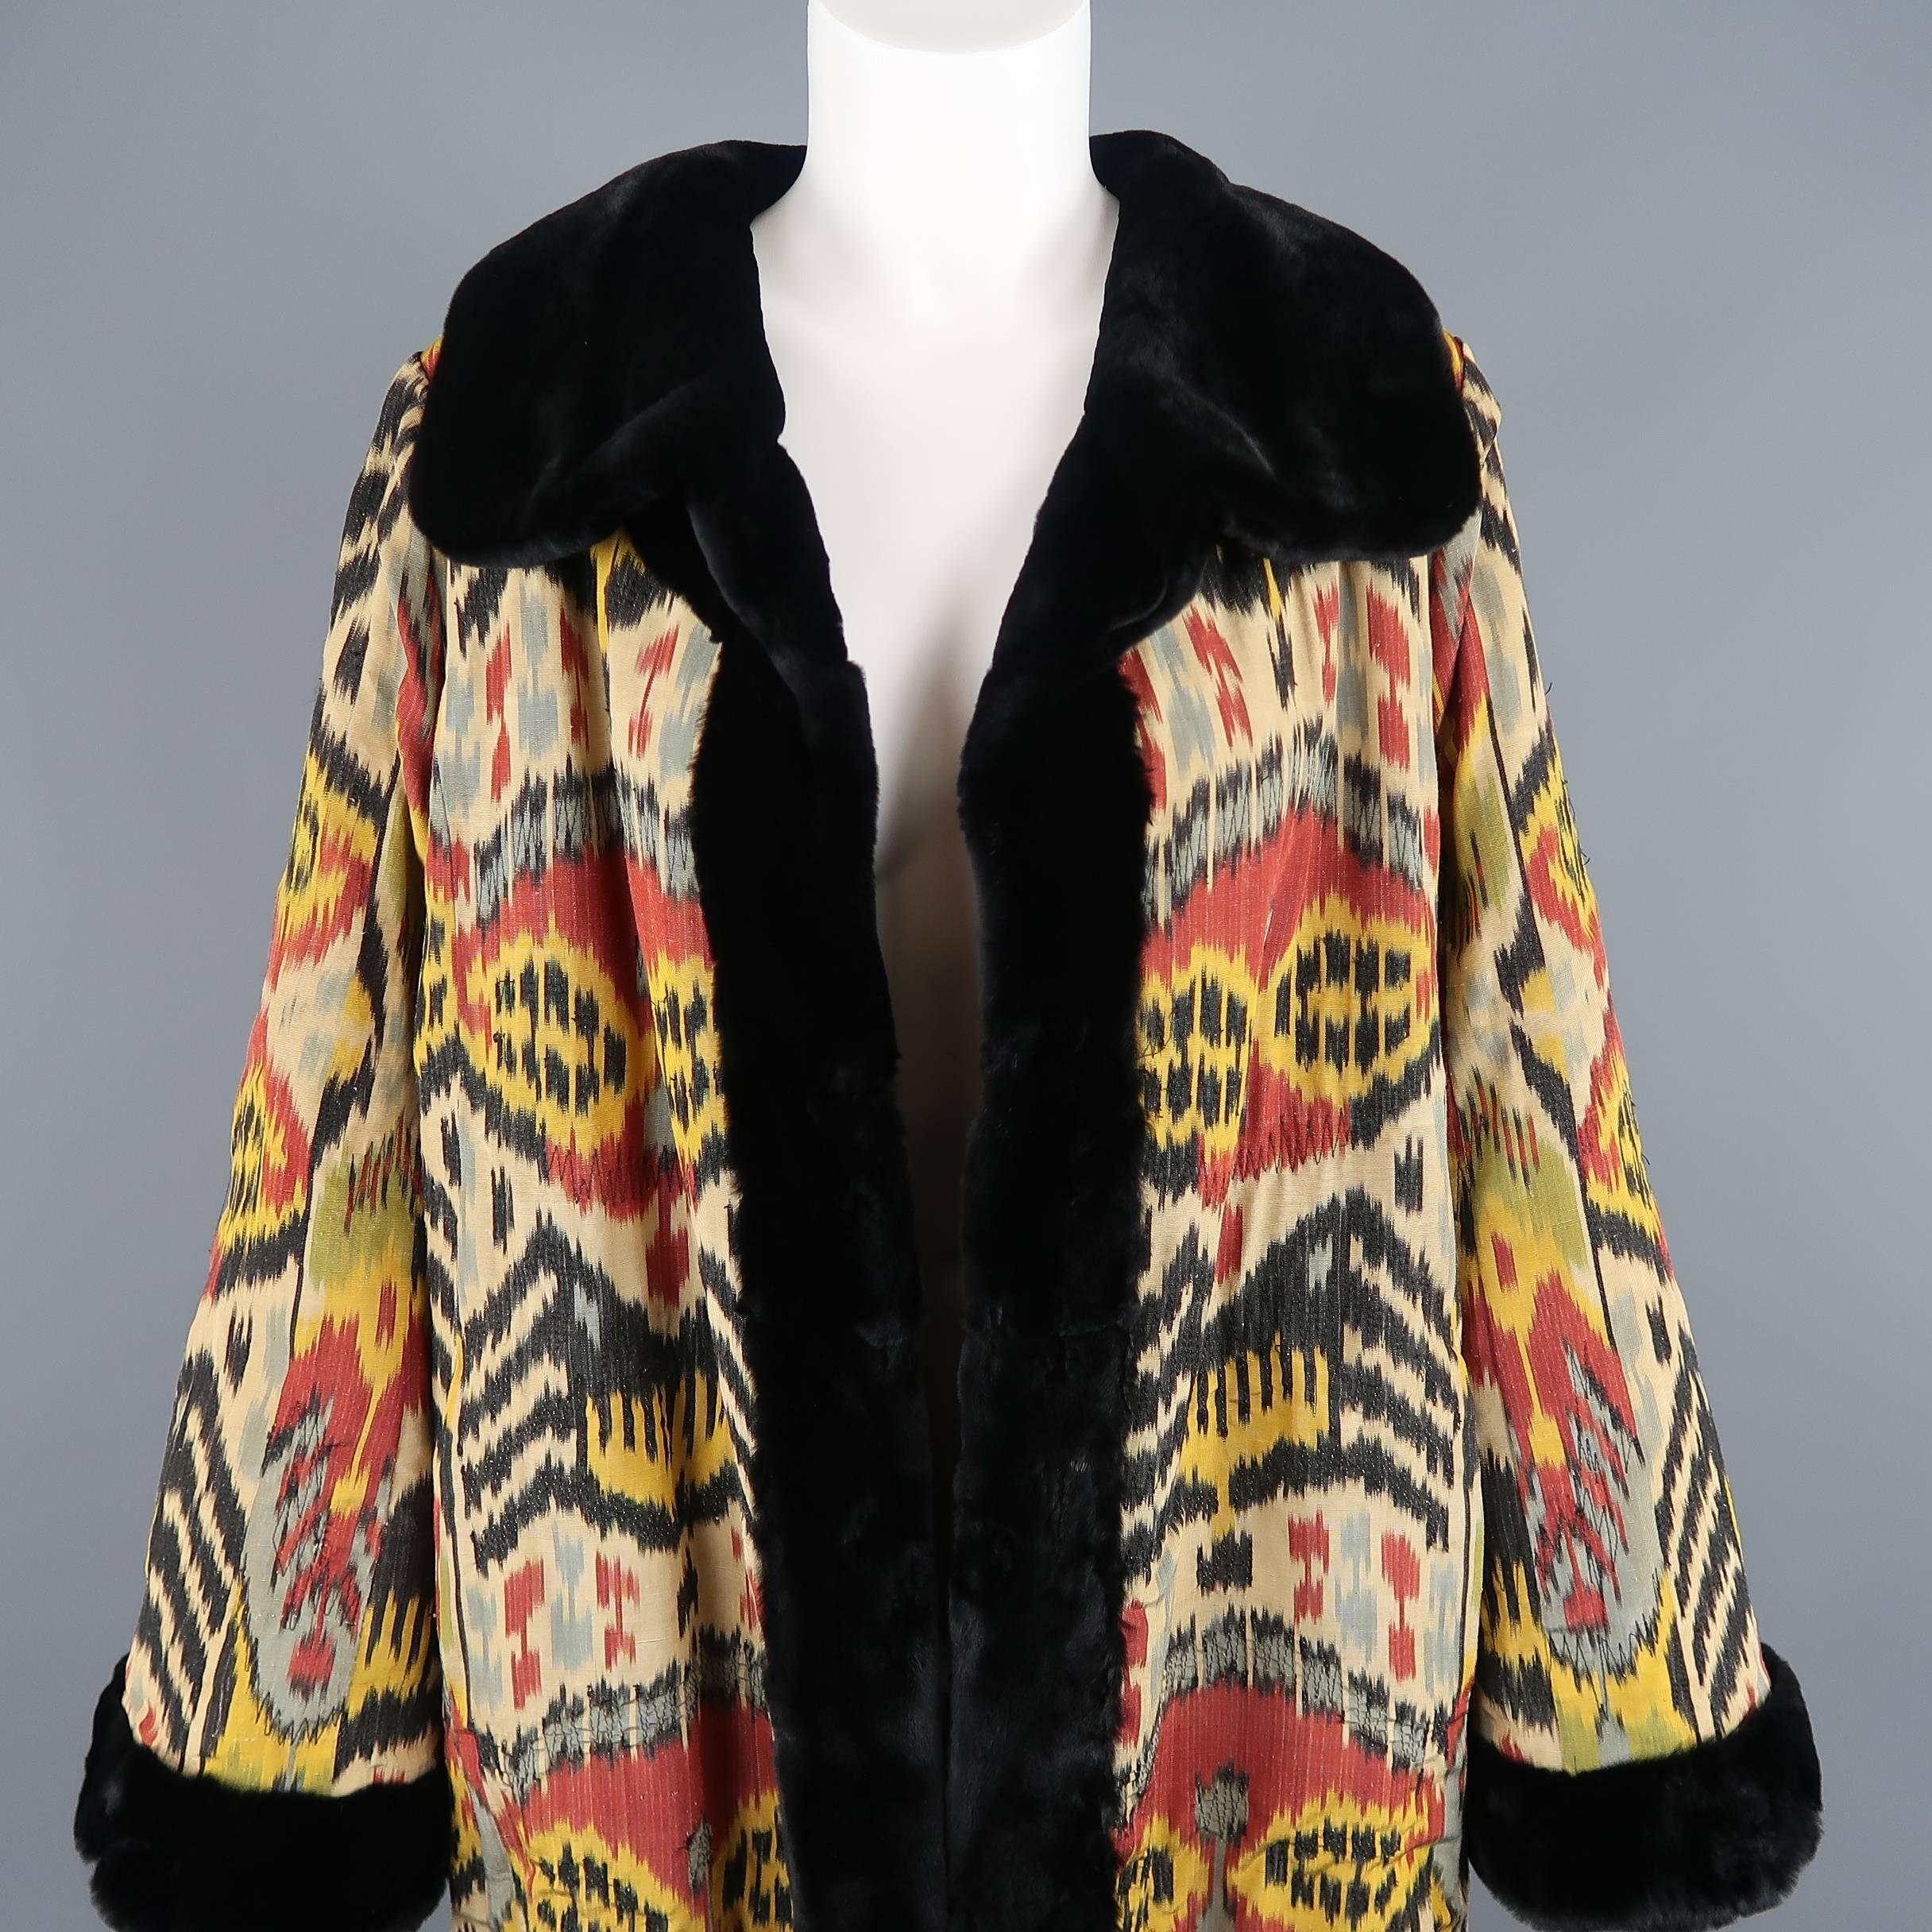 This stunning archive Oscar De La Renta reversible open front coat comes in a multi-color Ikat print silk Oscar used since his days at Balmain, with a black trimmed mink spread collar and trimmed cuffs with a reverse all sheared mink side completely